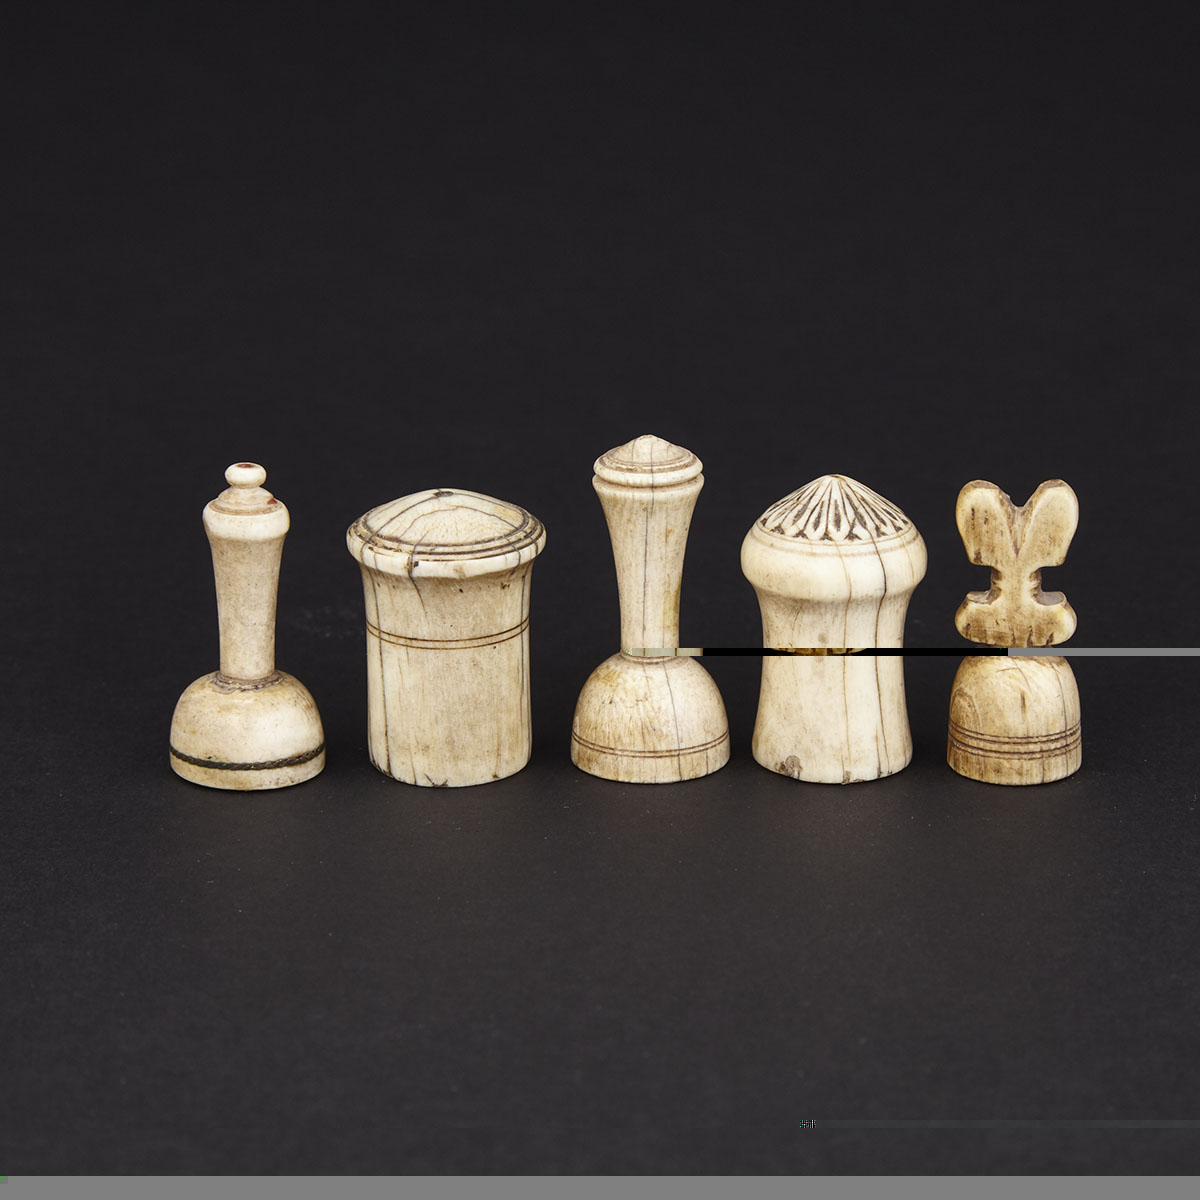 Group of Five Arab Islamic Ivory and Bone Chess Pieces, 18th century and earlier